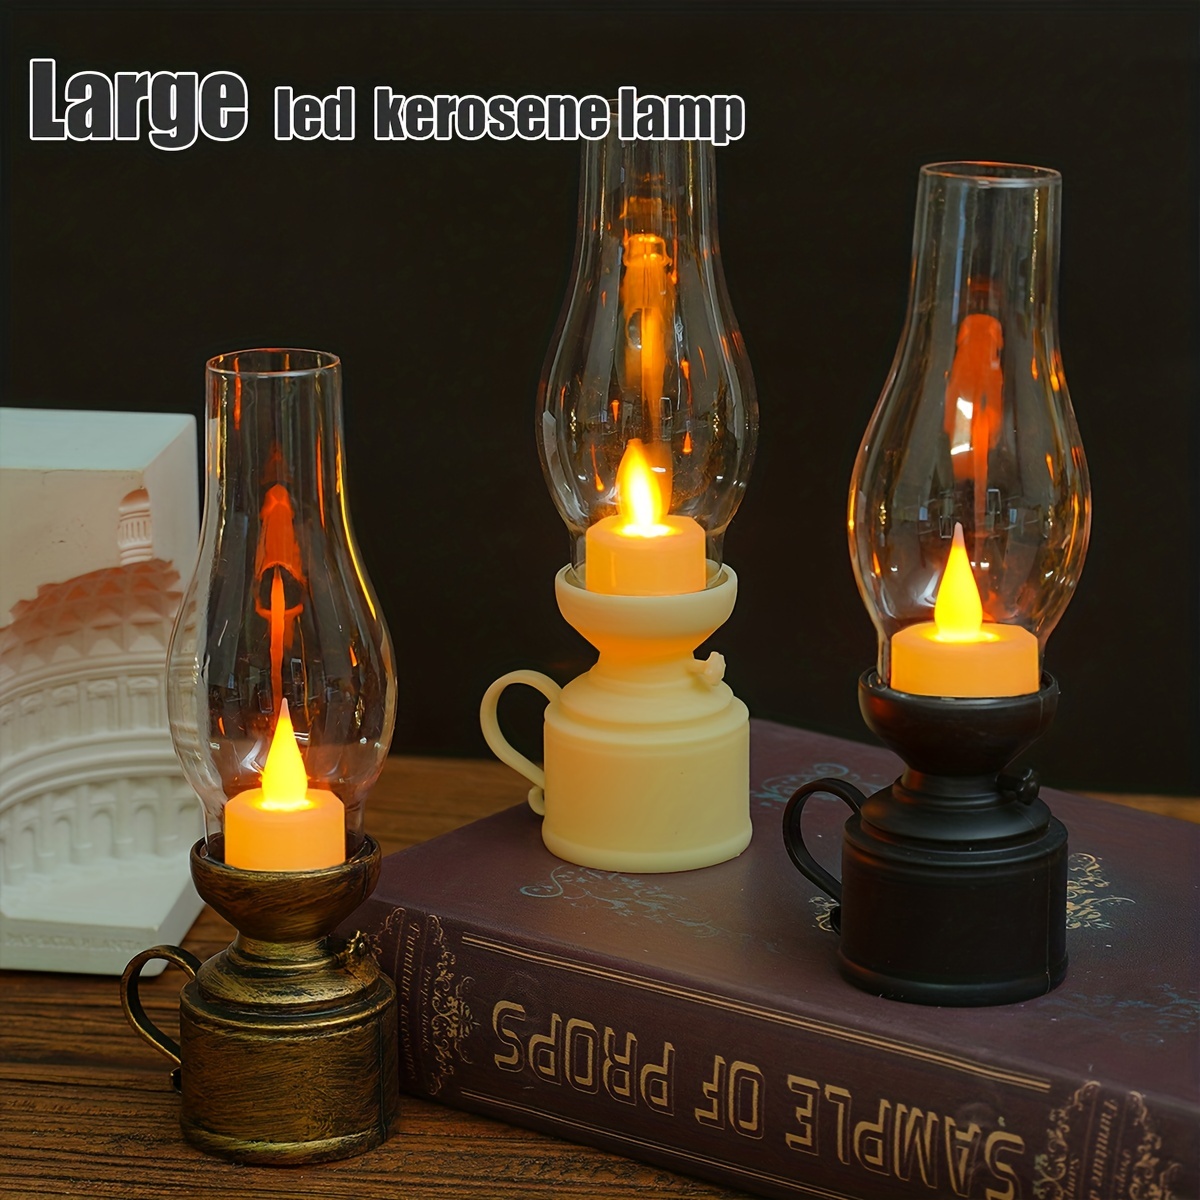 Retro Oil Lamp Electric Flameless Candle Lamps LED Novelty